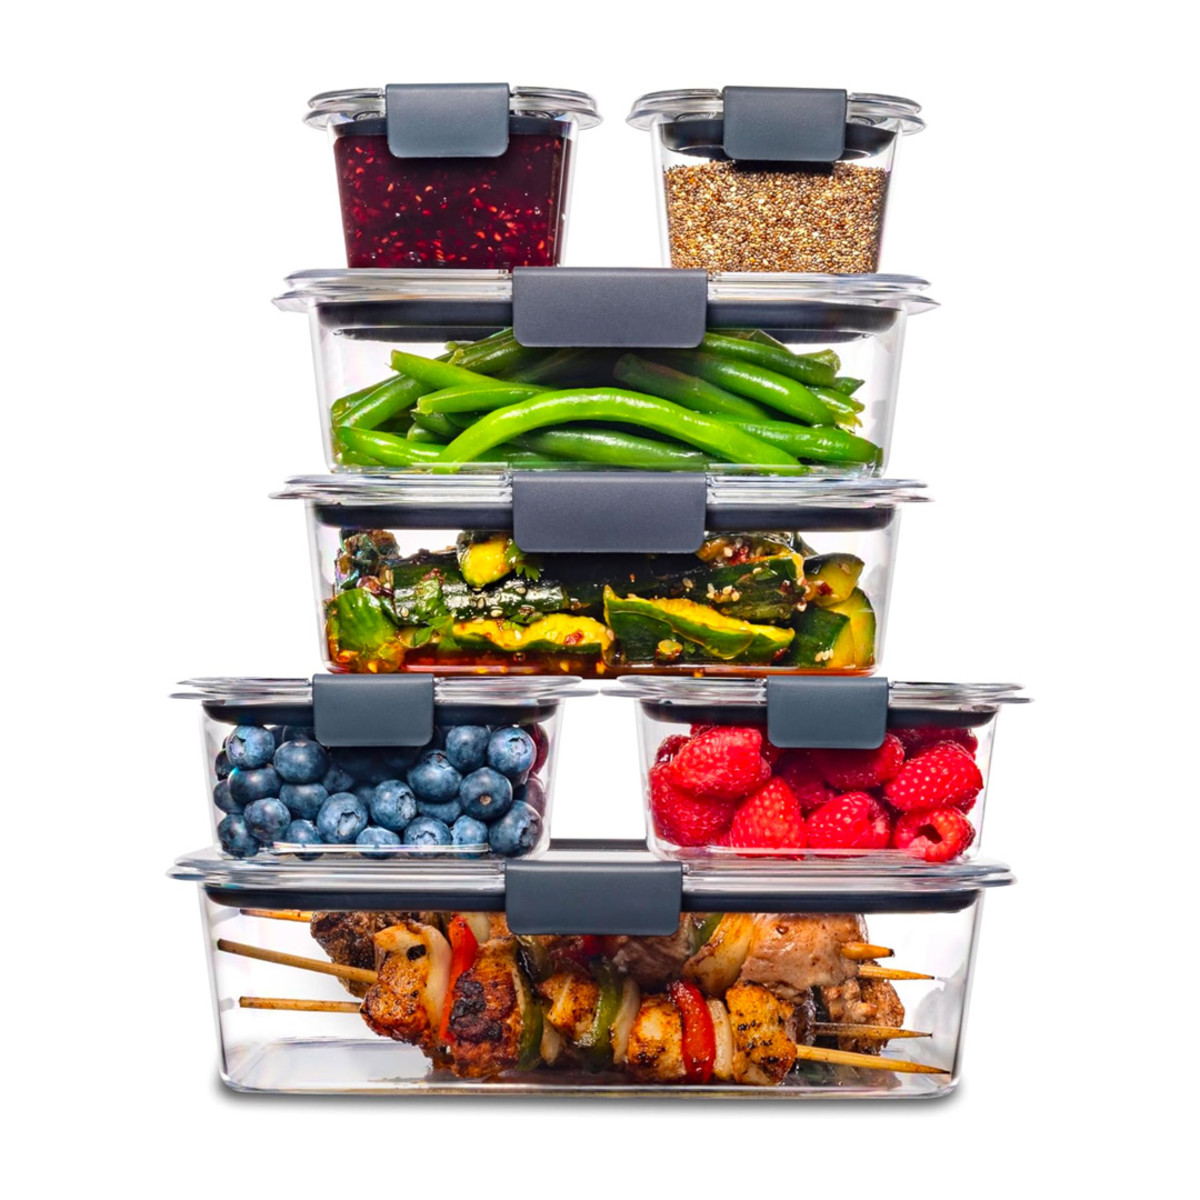 s best-selling Rubbermaid 14-pc. Food Storage set just dropped to  $22.50 (Reg. $38)